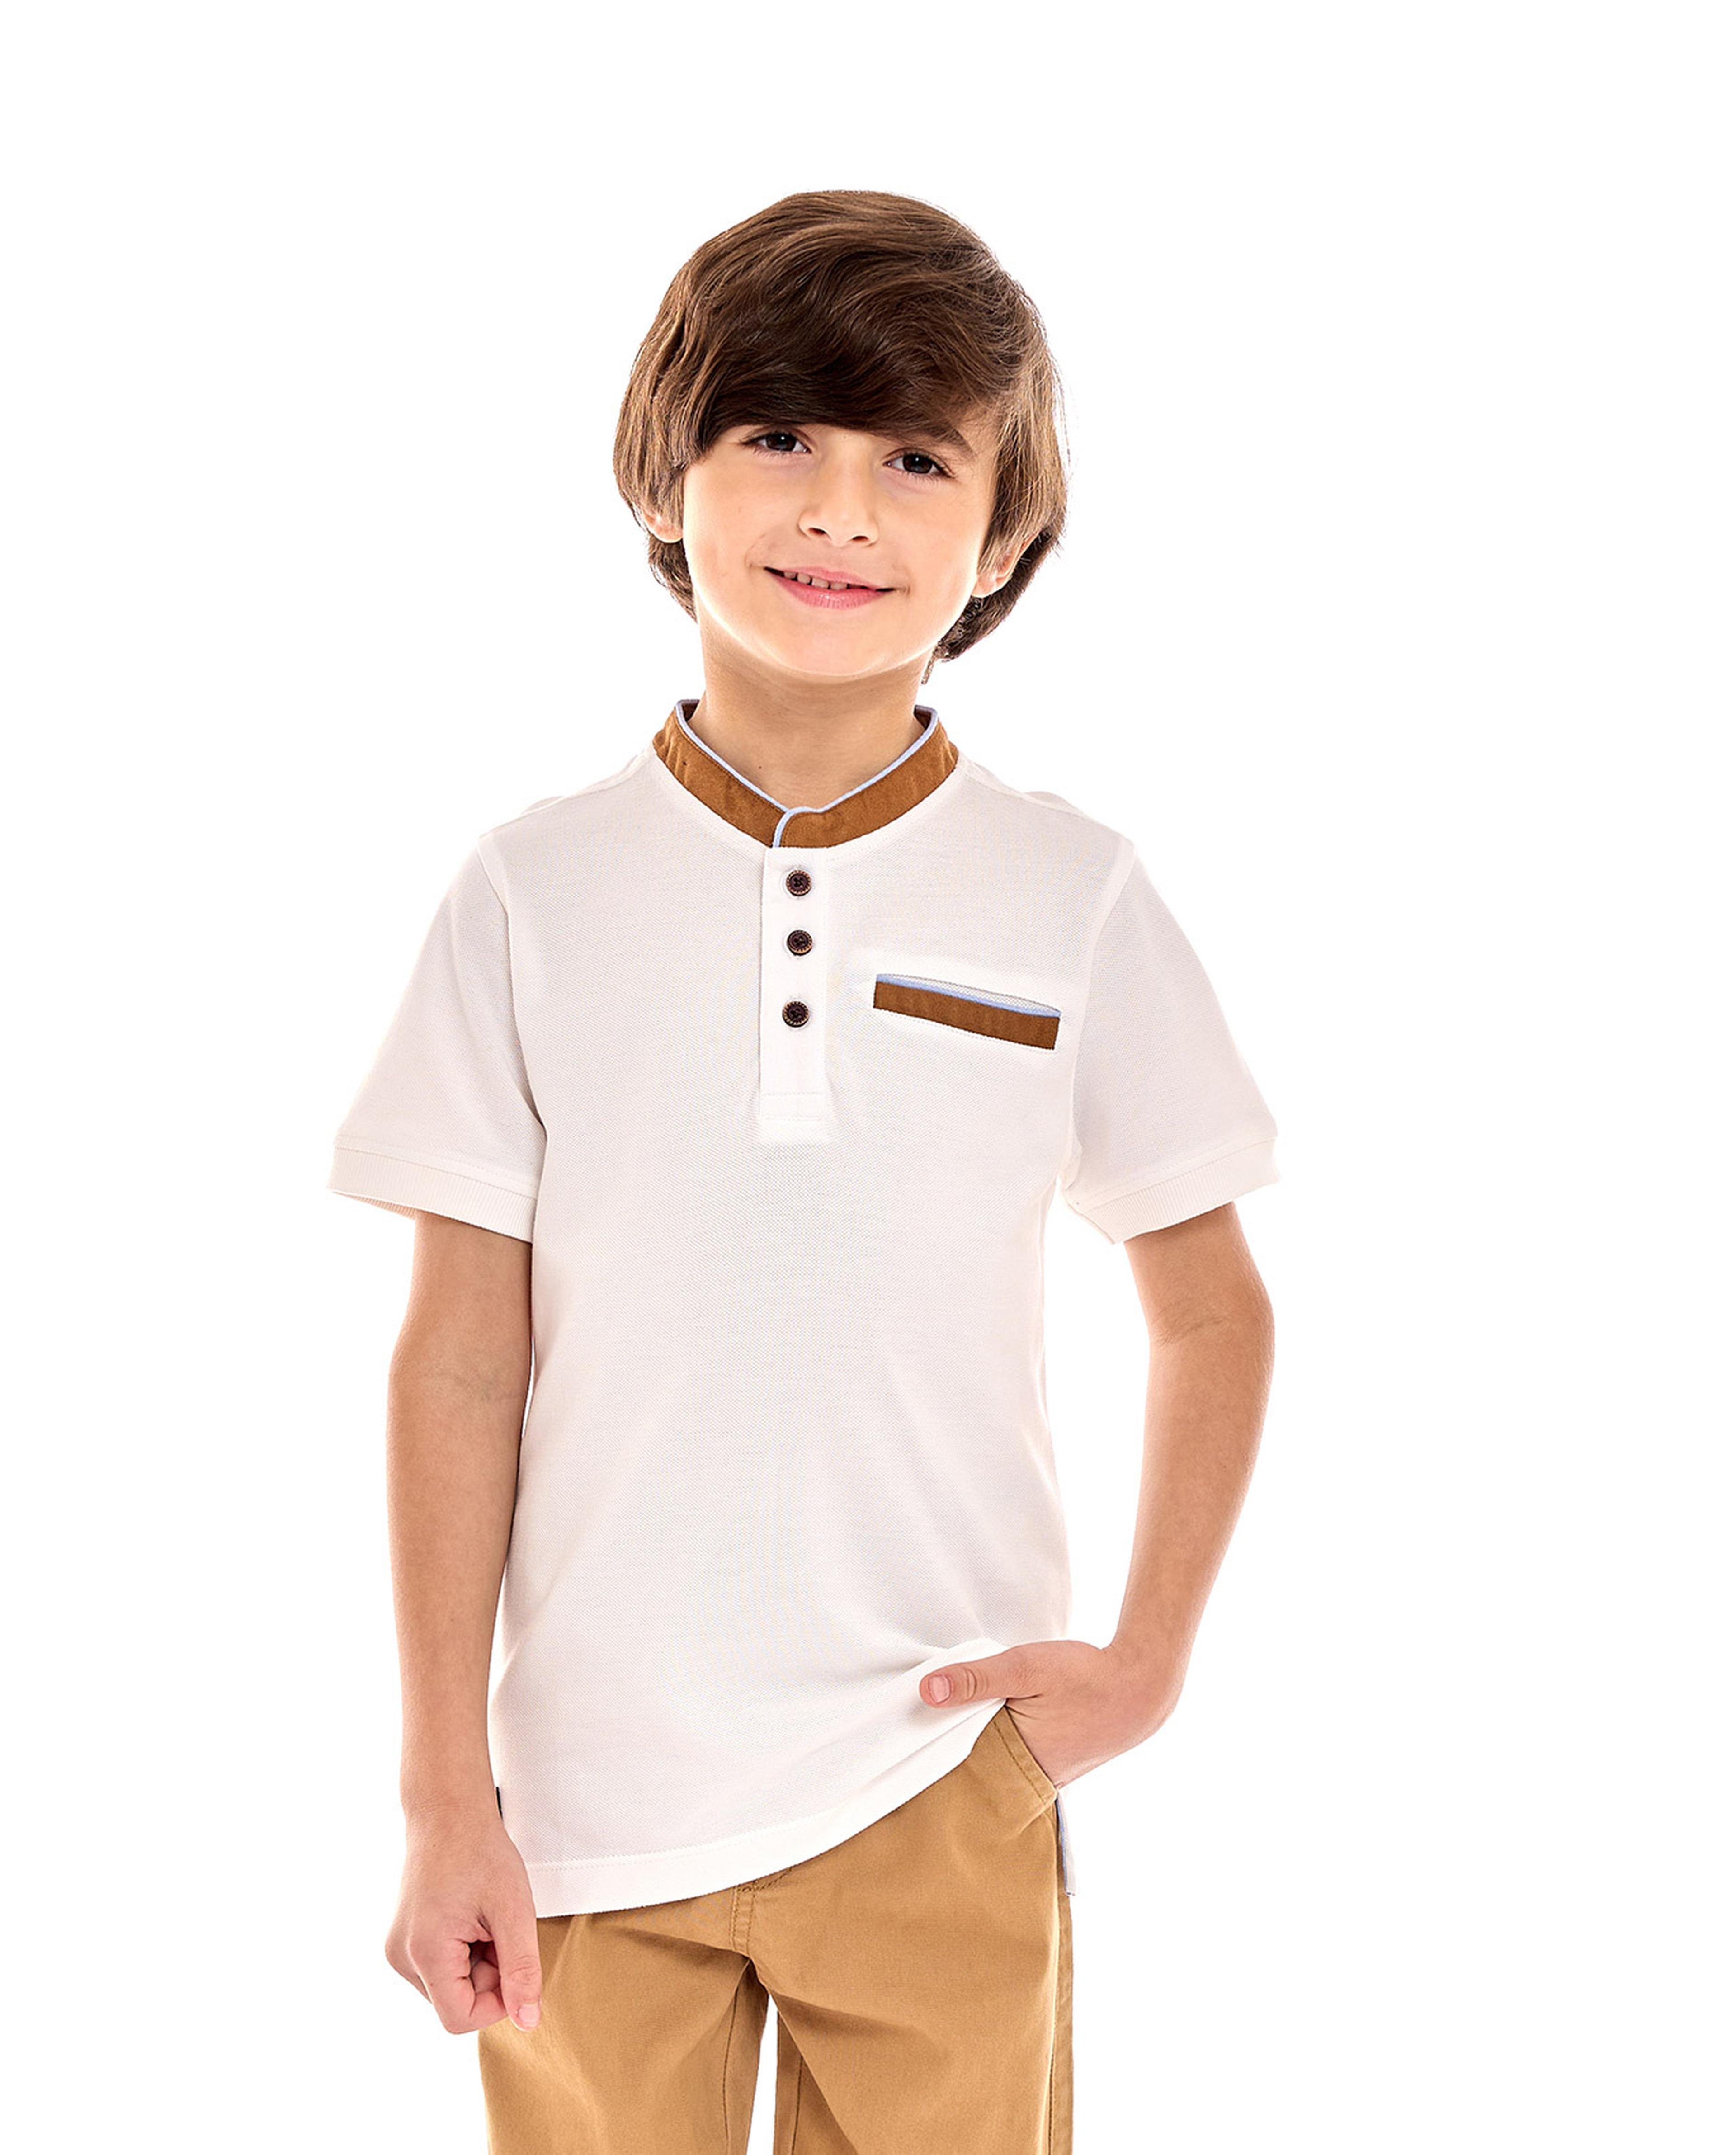 Contrast Trim T-Shirt with Stand Collar and Short Sleeves